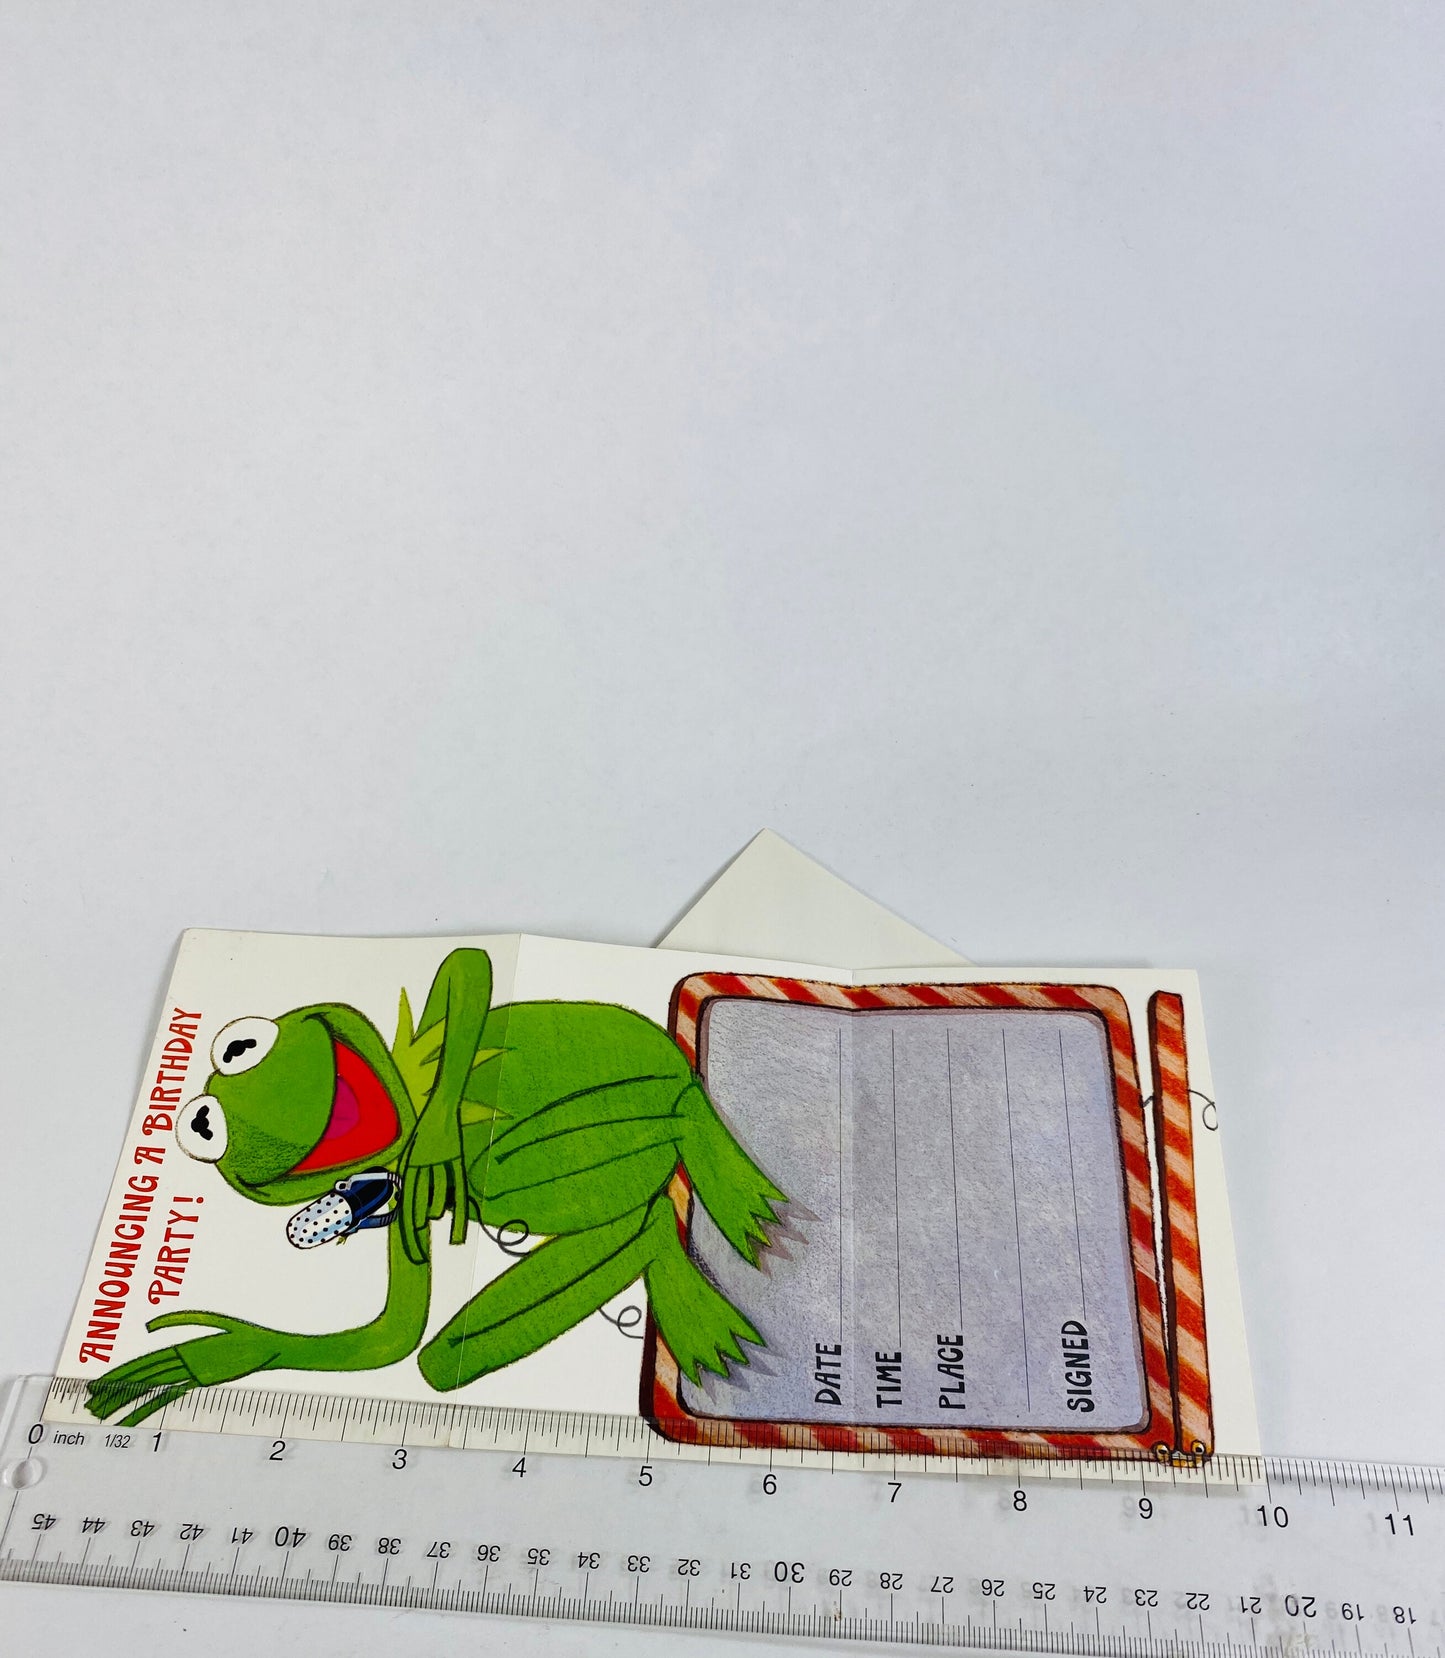 1980s Kermit the Frog muppets party invitation card with envelope. Vintage unused birthday invite frog with microphone